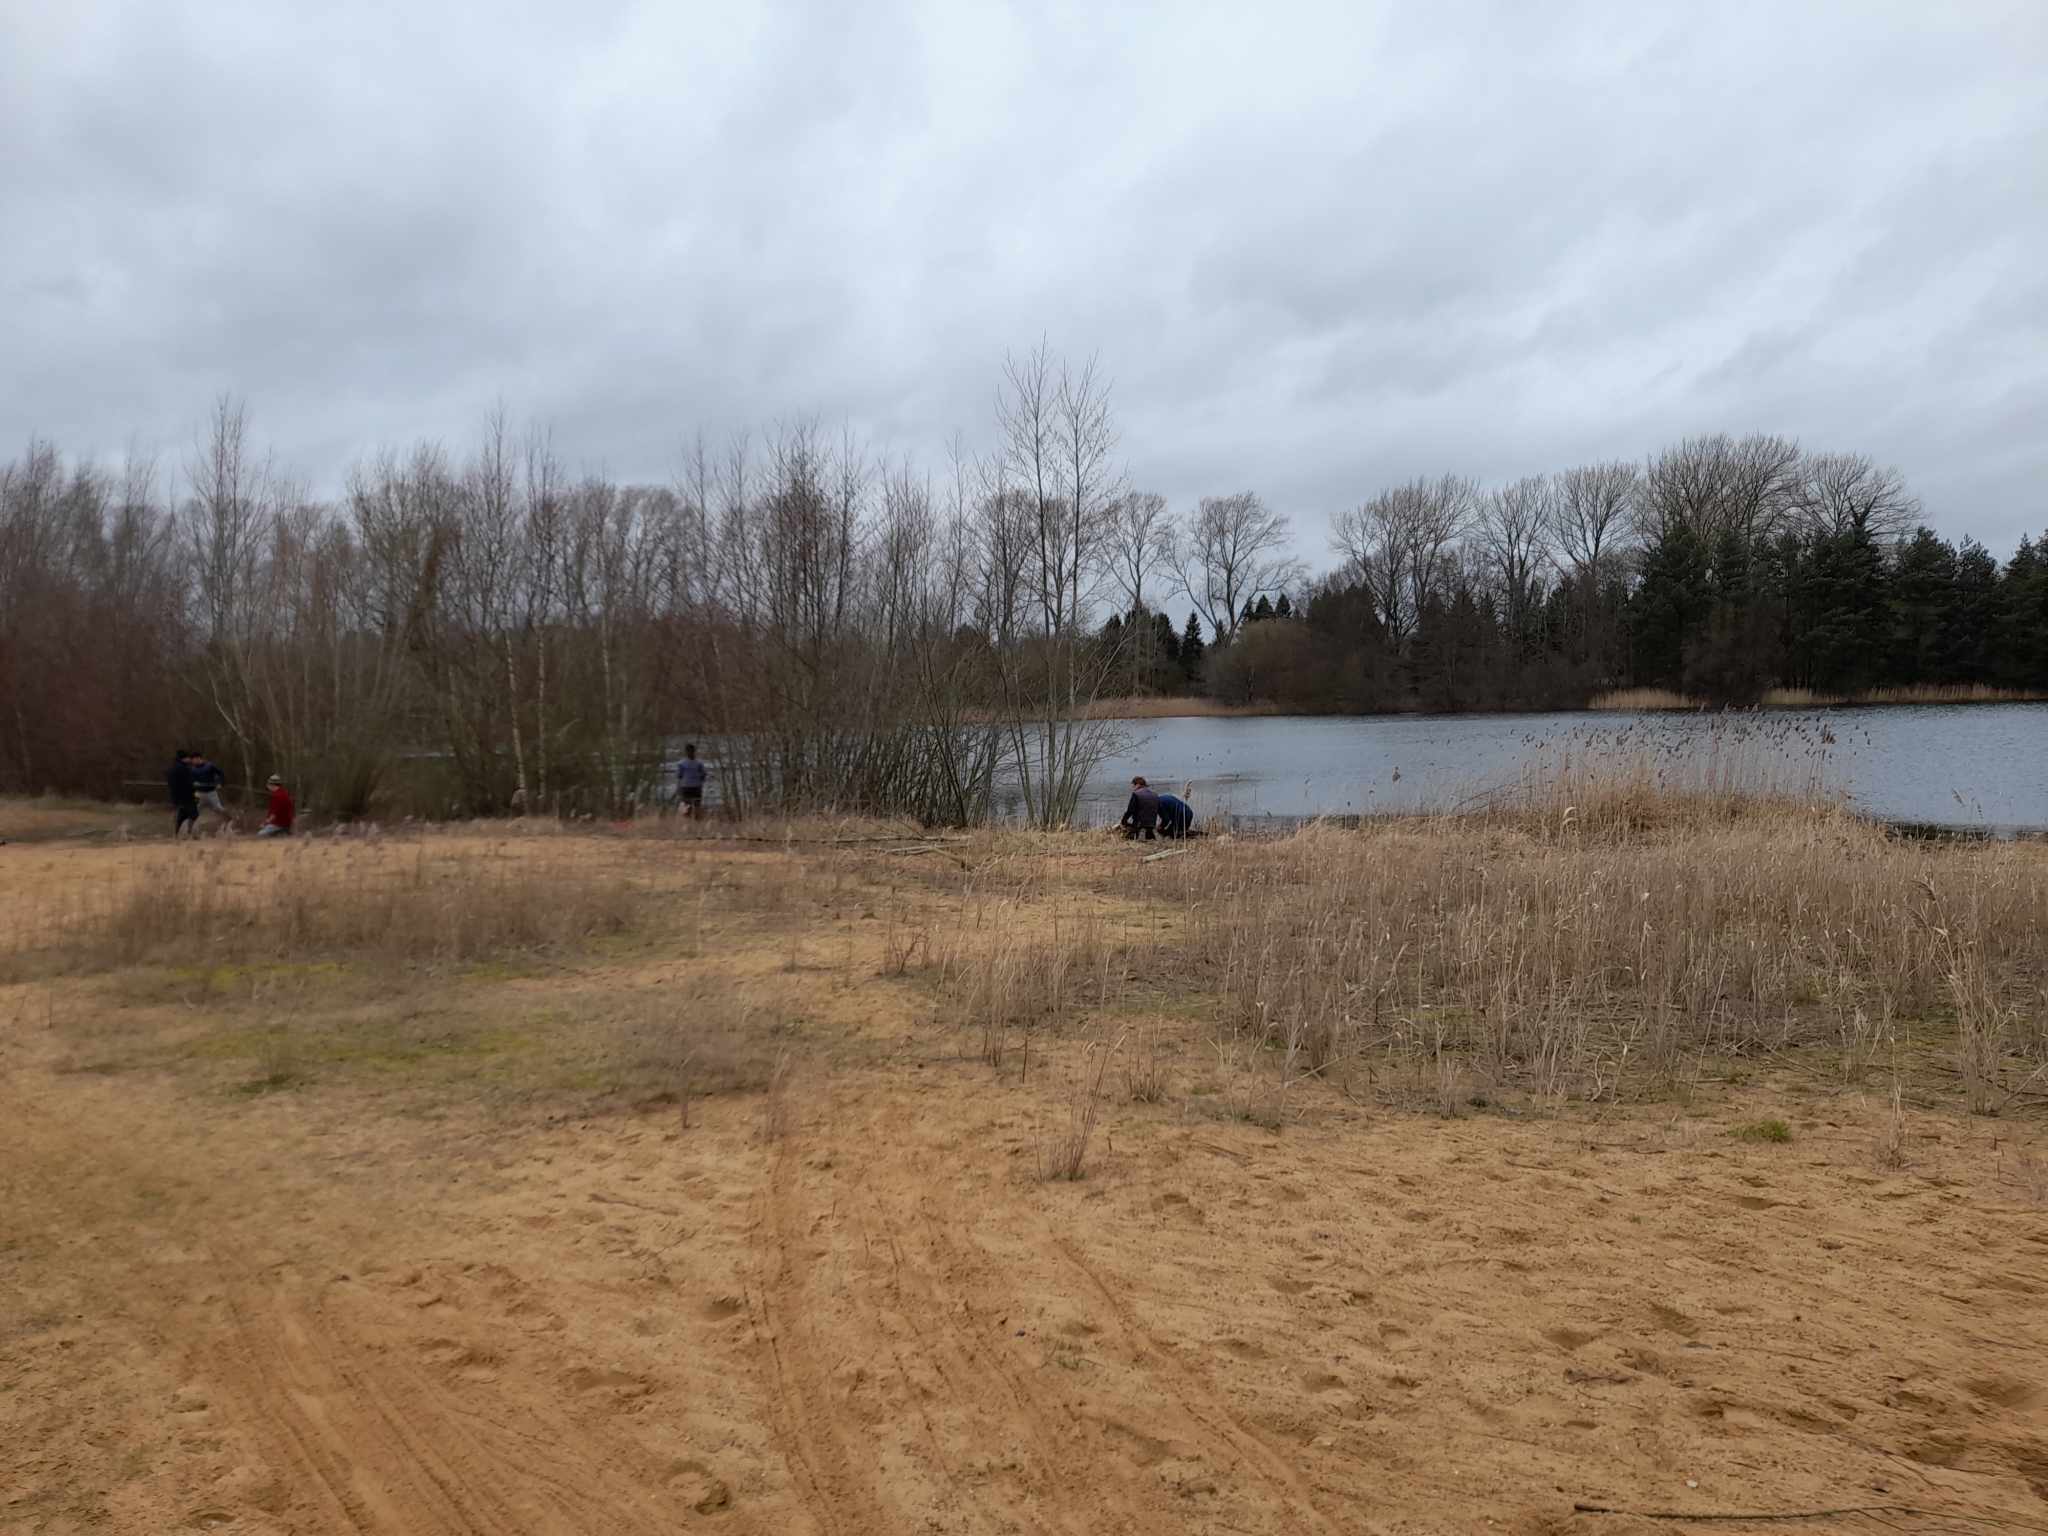 A photo from the FoTF Conservation Event - February 2022 - Clearing overgrowth at Lynford Water : A view from the waters edge onto Lyndord Water with volunteers working in the background